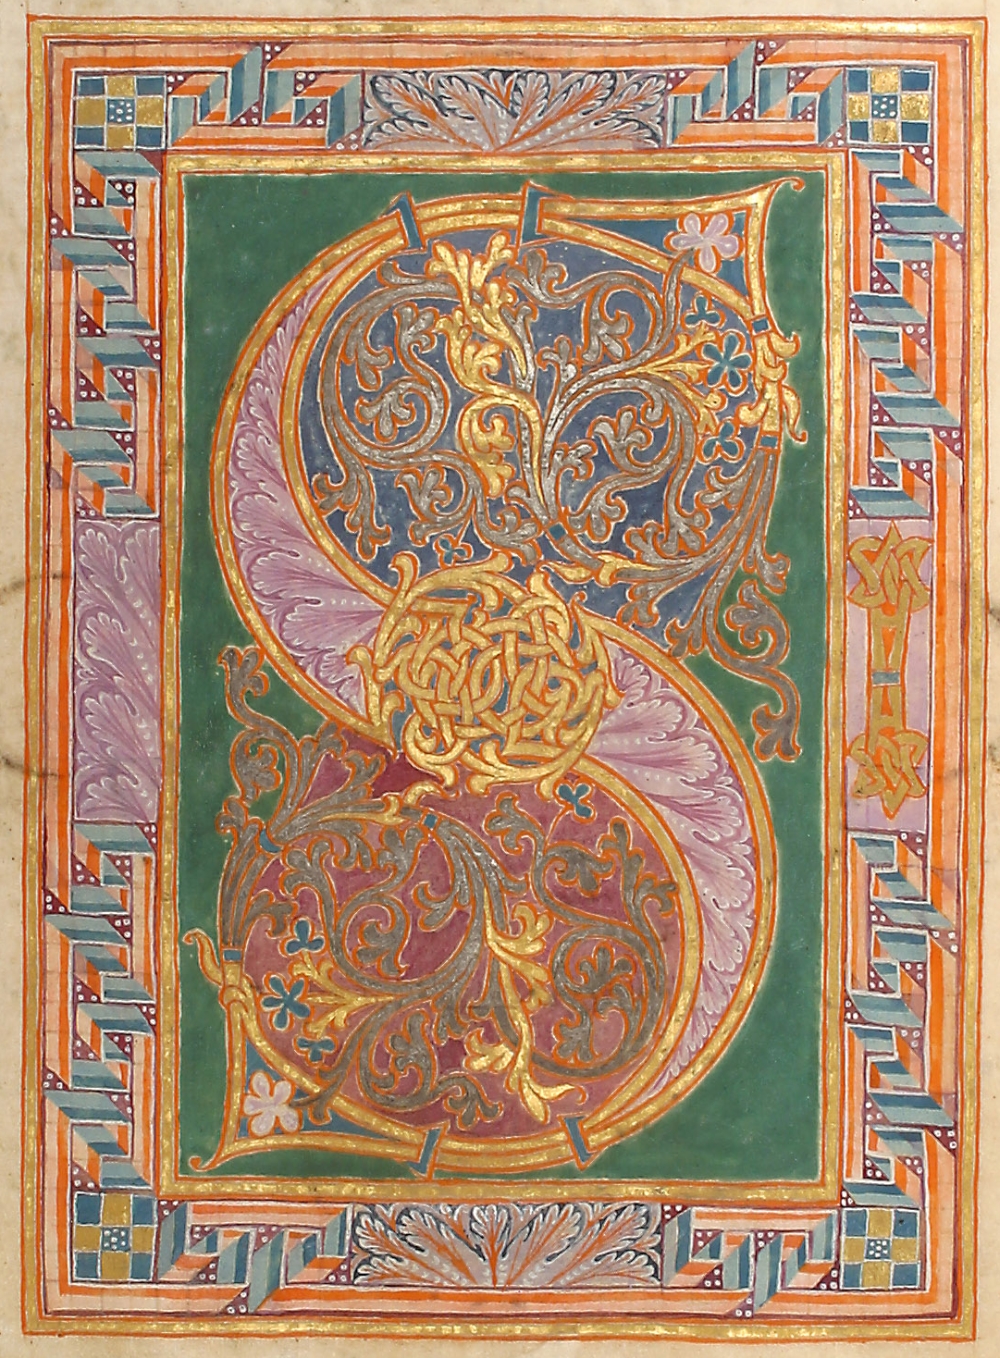 illuminated manuscript from germany (letter S)